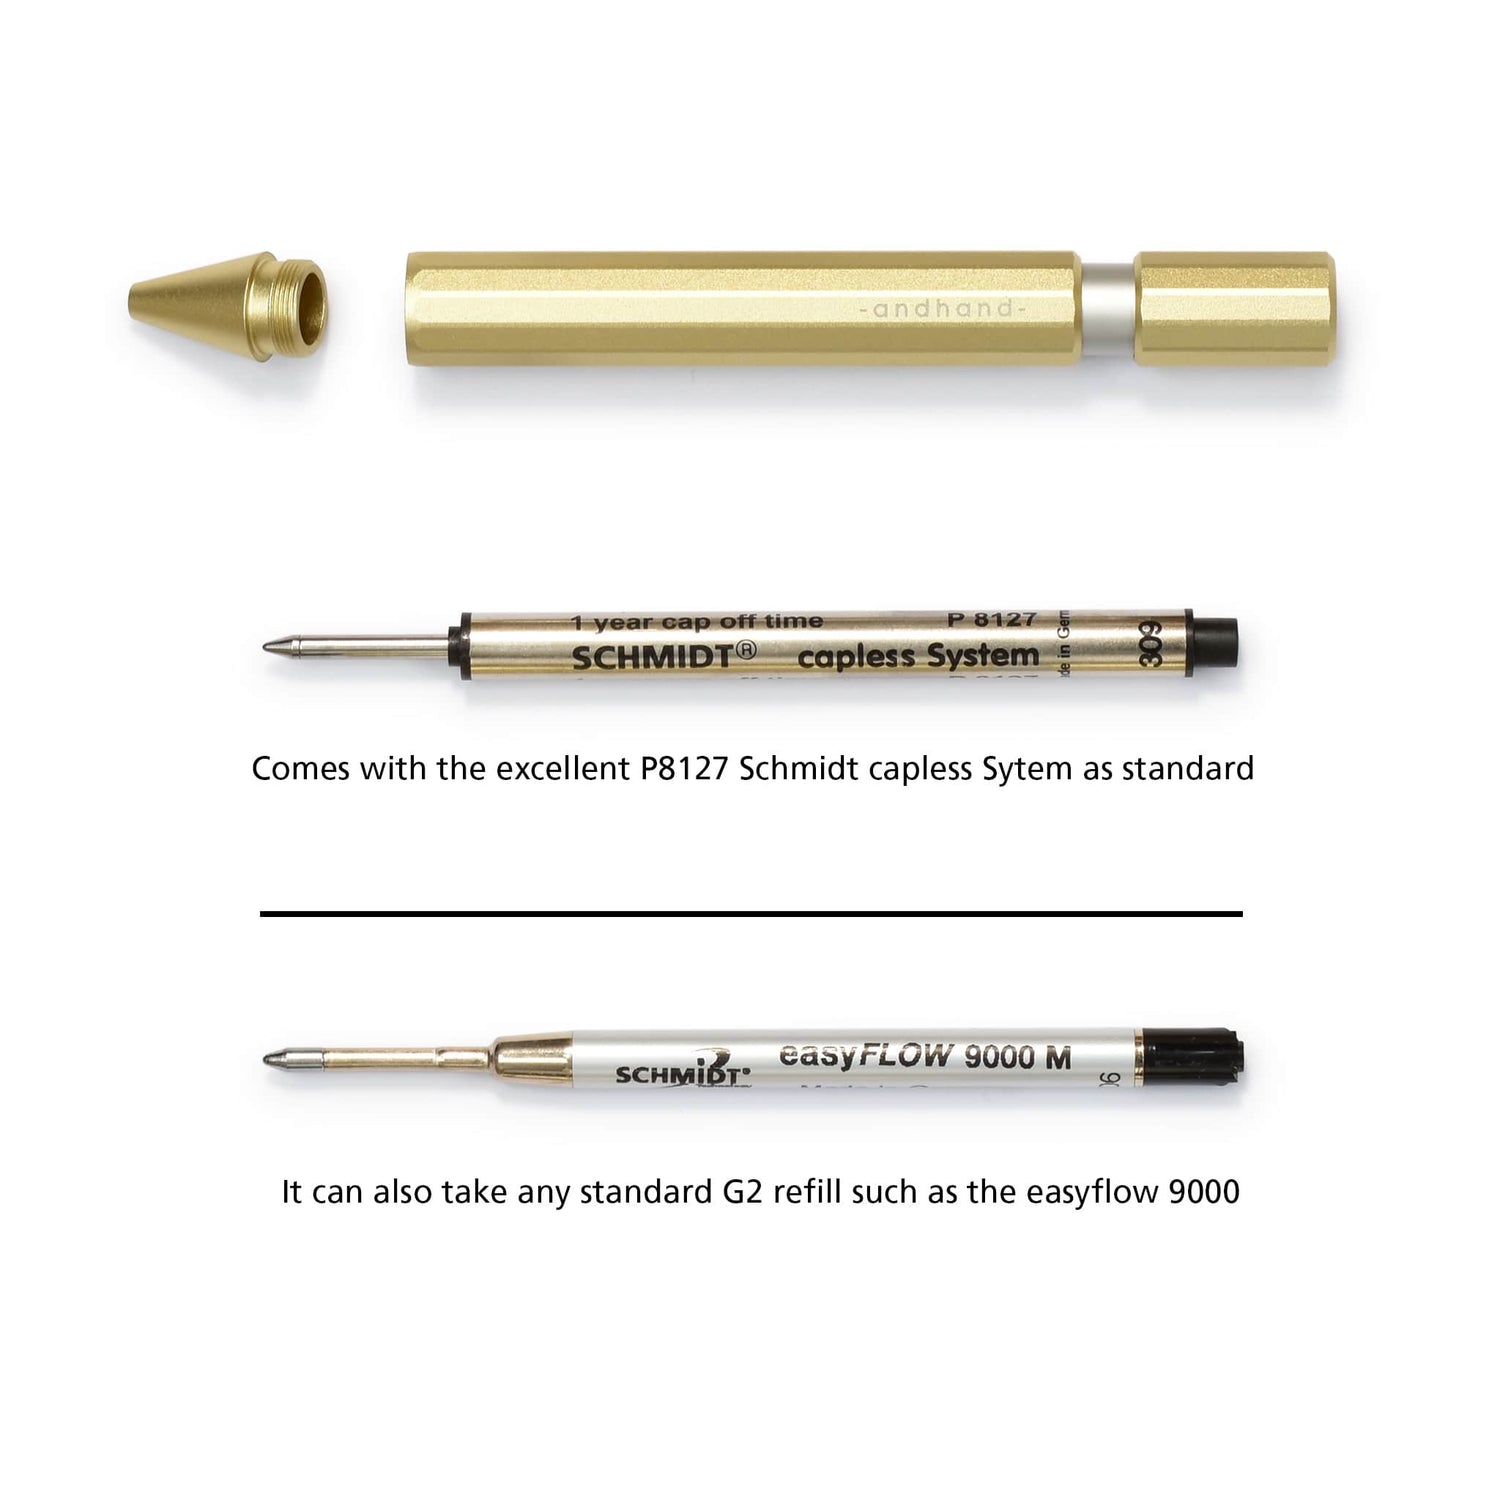 image showing refill options for the aspect retractable pen. Takes both the P8127 and any G2 refill